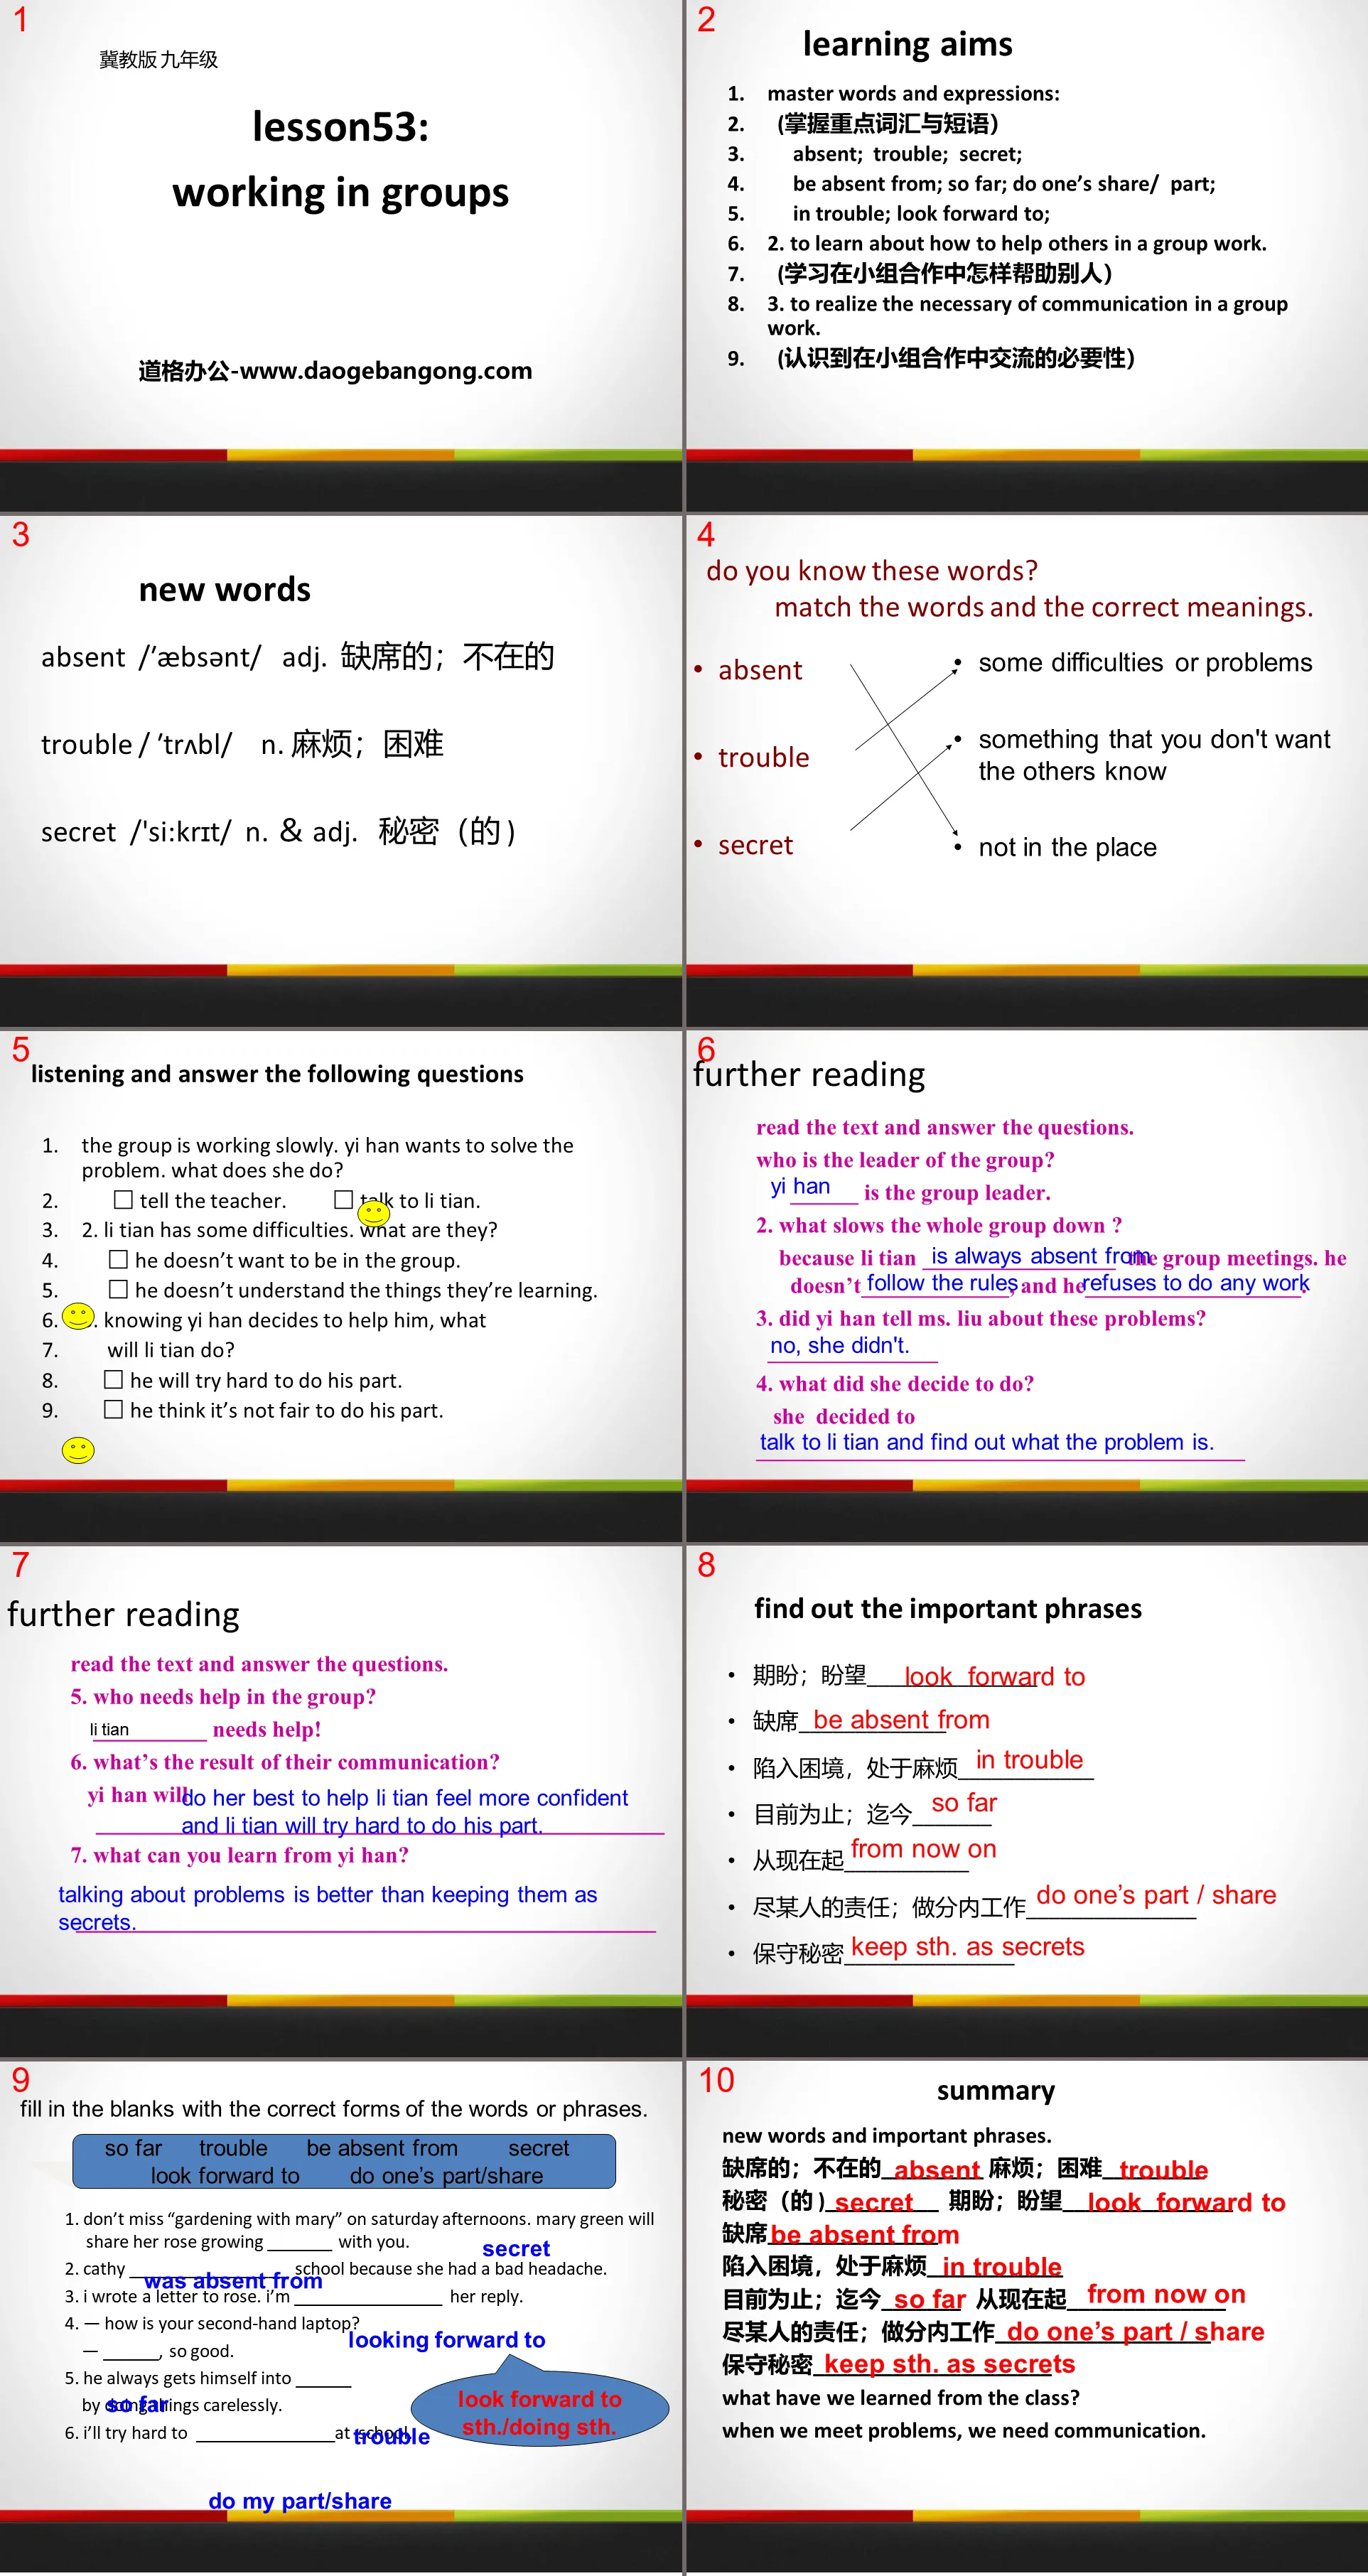 《Working in Groups》Communication PPT